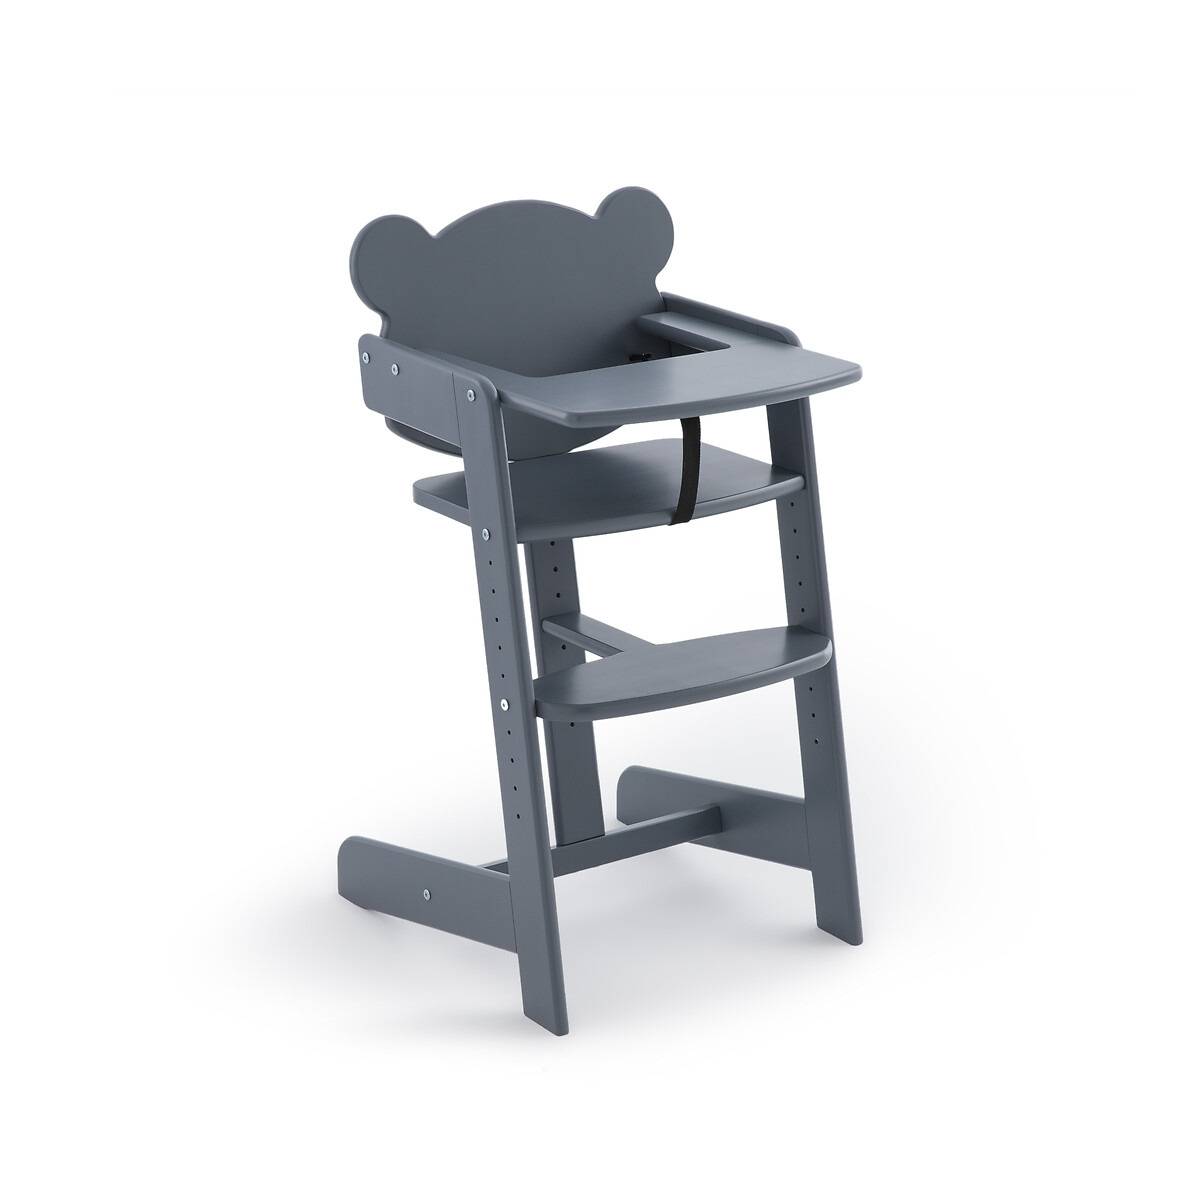 Ourson Rubberwood High Chair - image 1